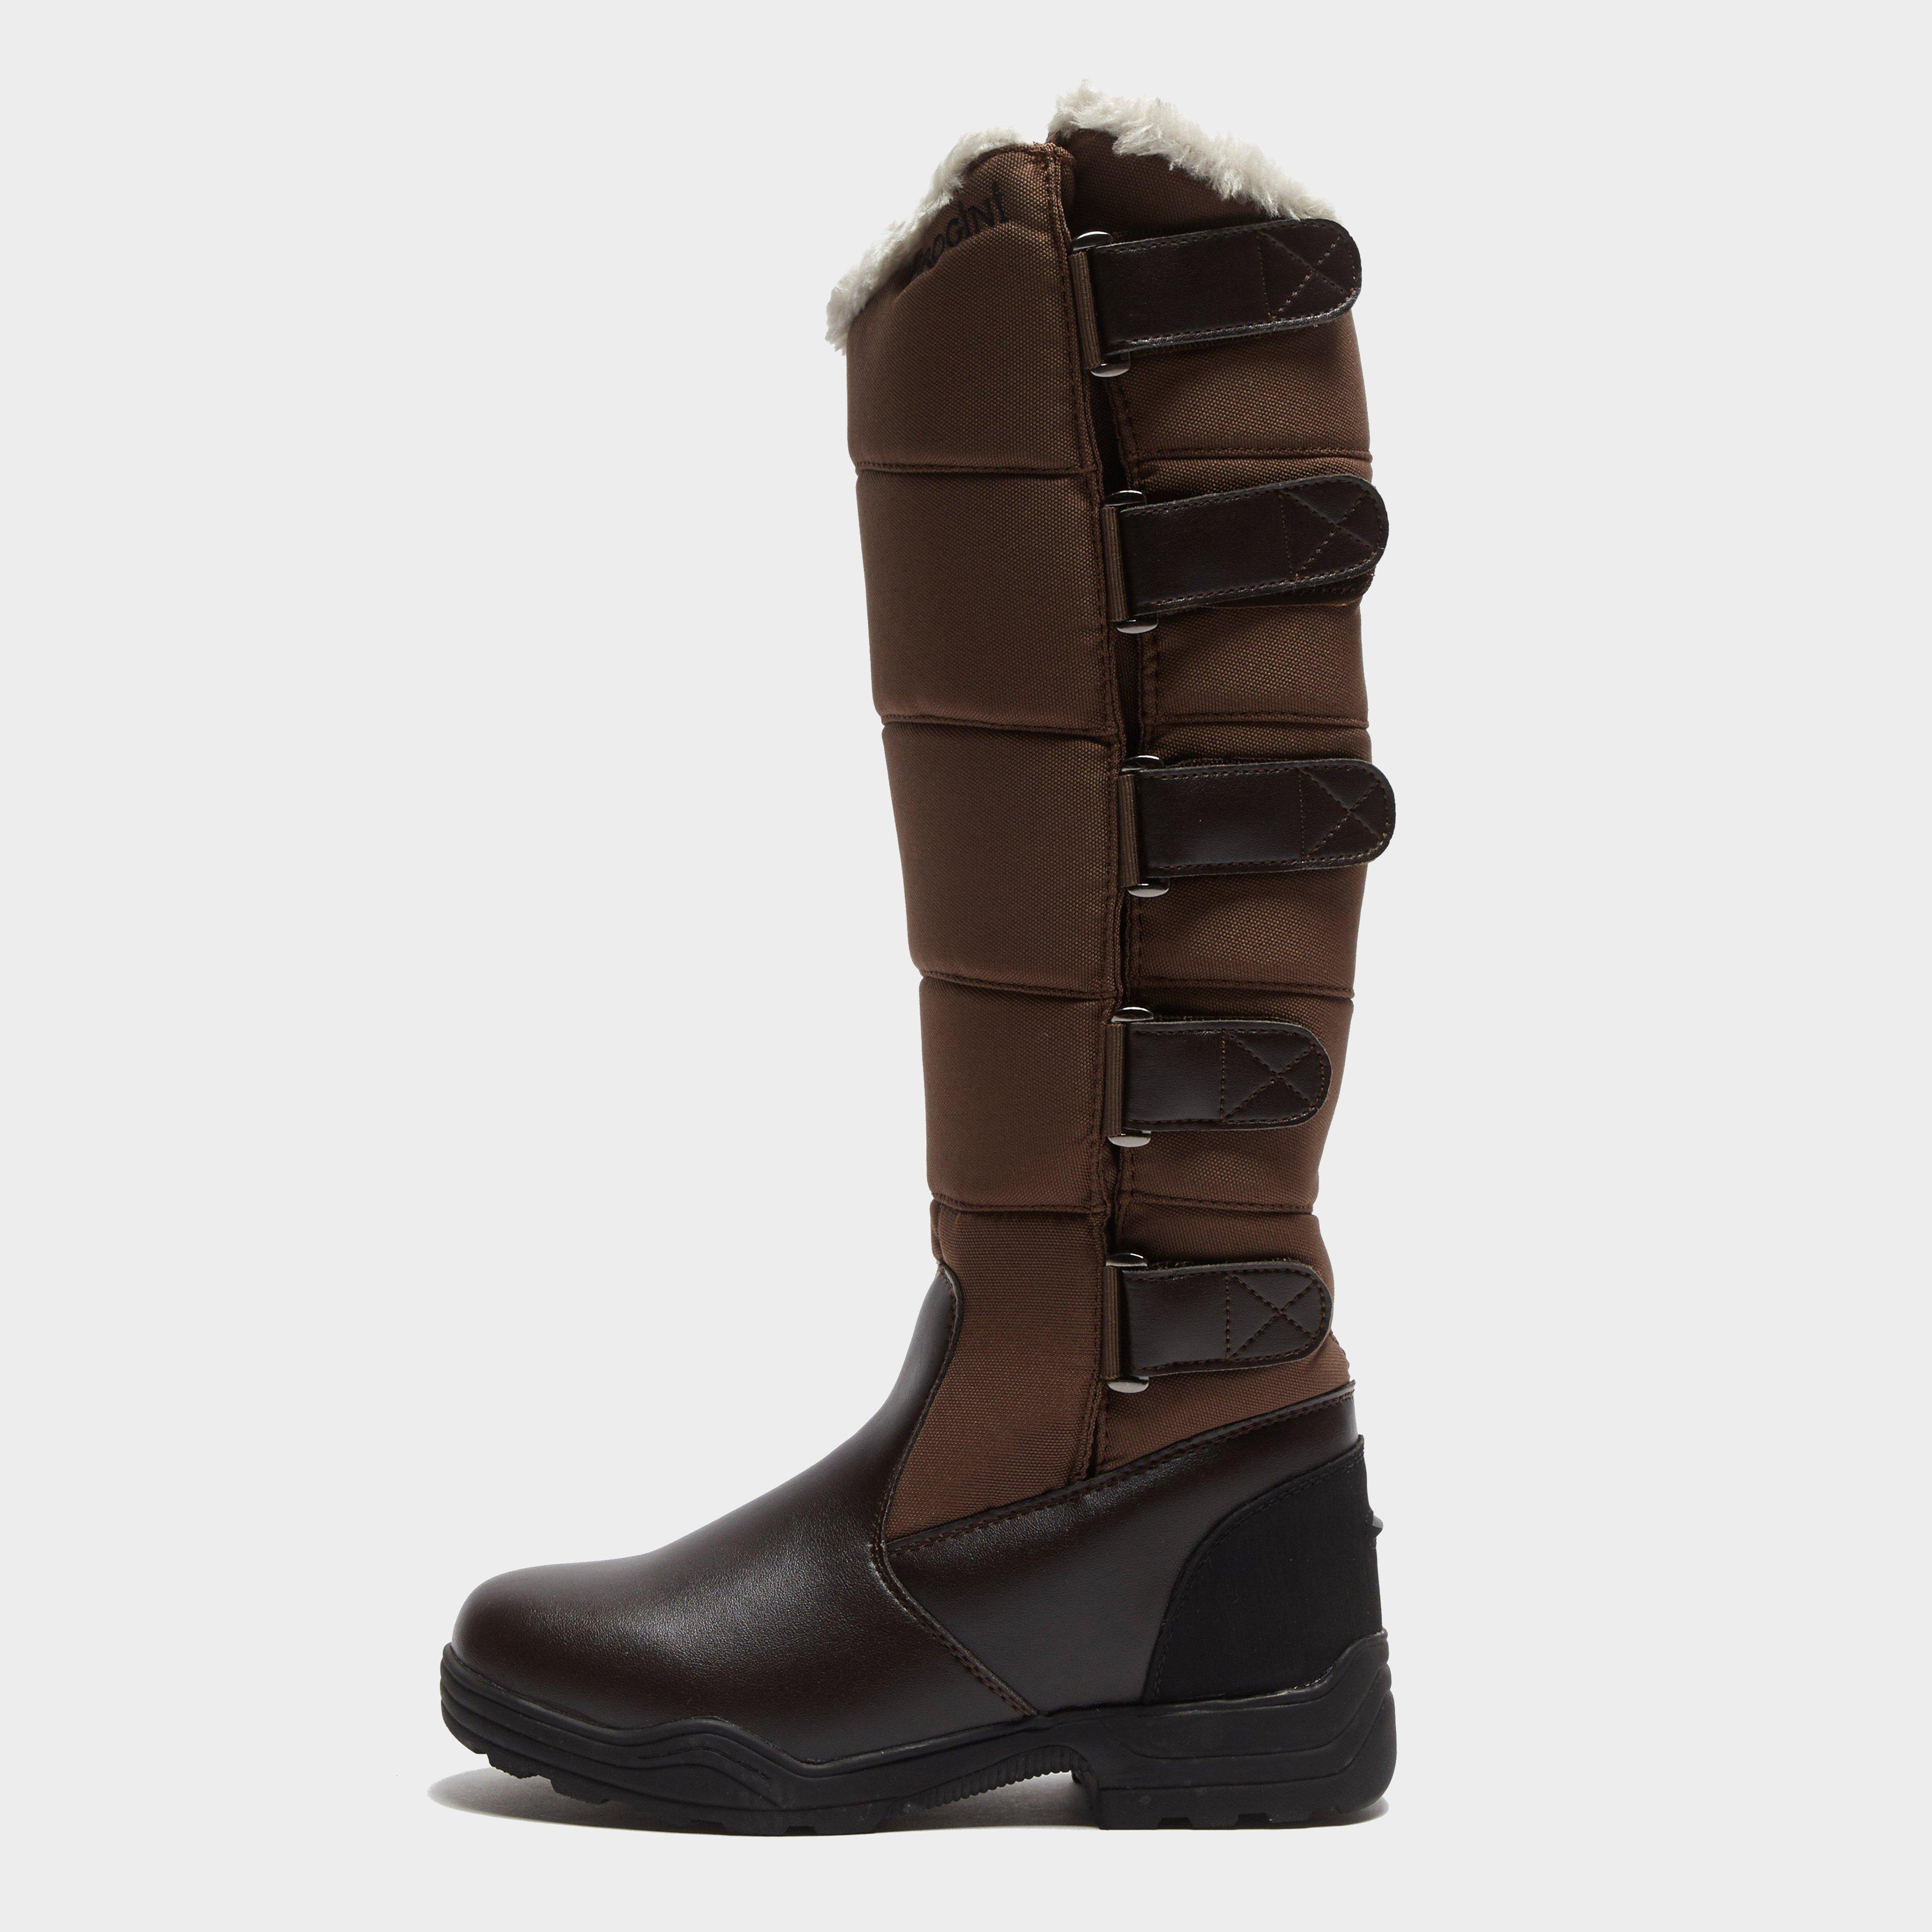 Ladies Snow Boots | Winter Boots for 